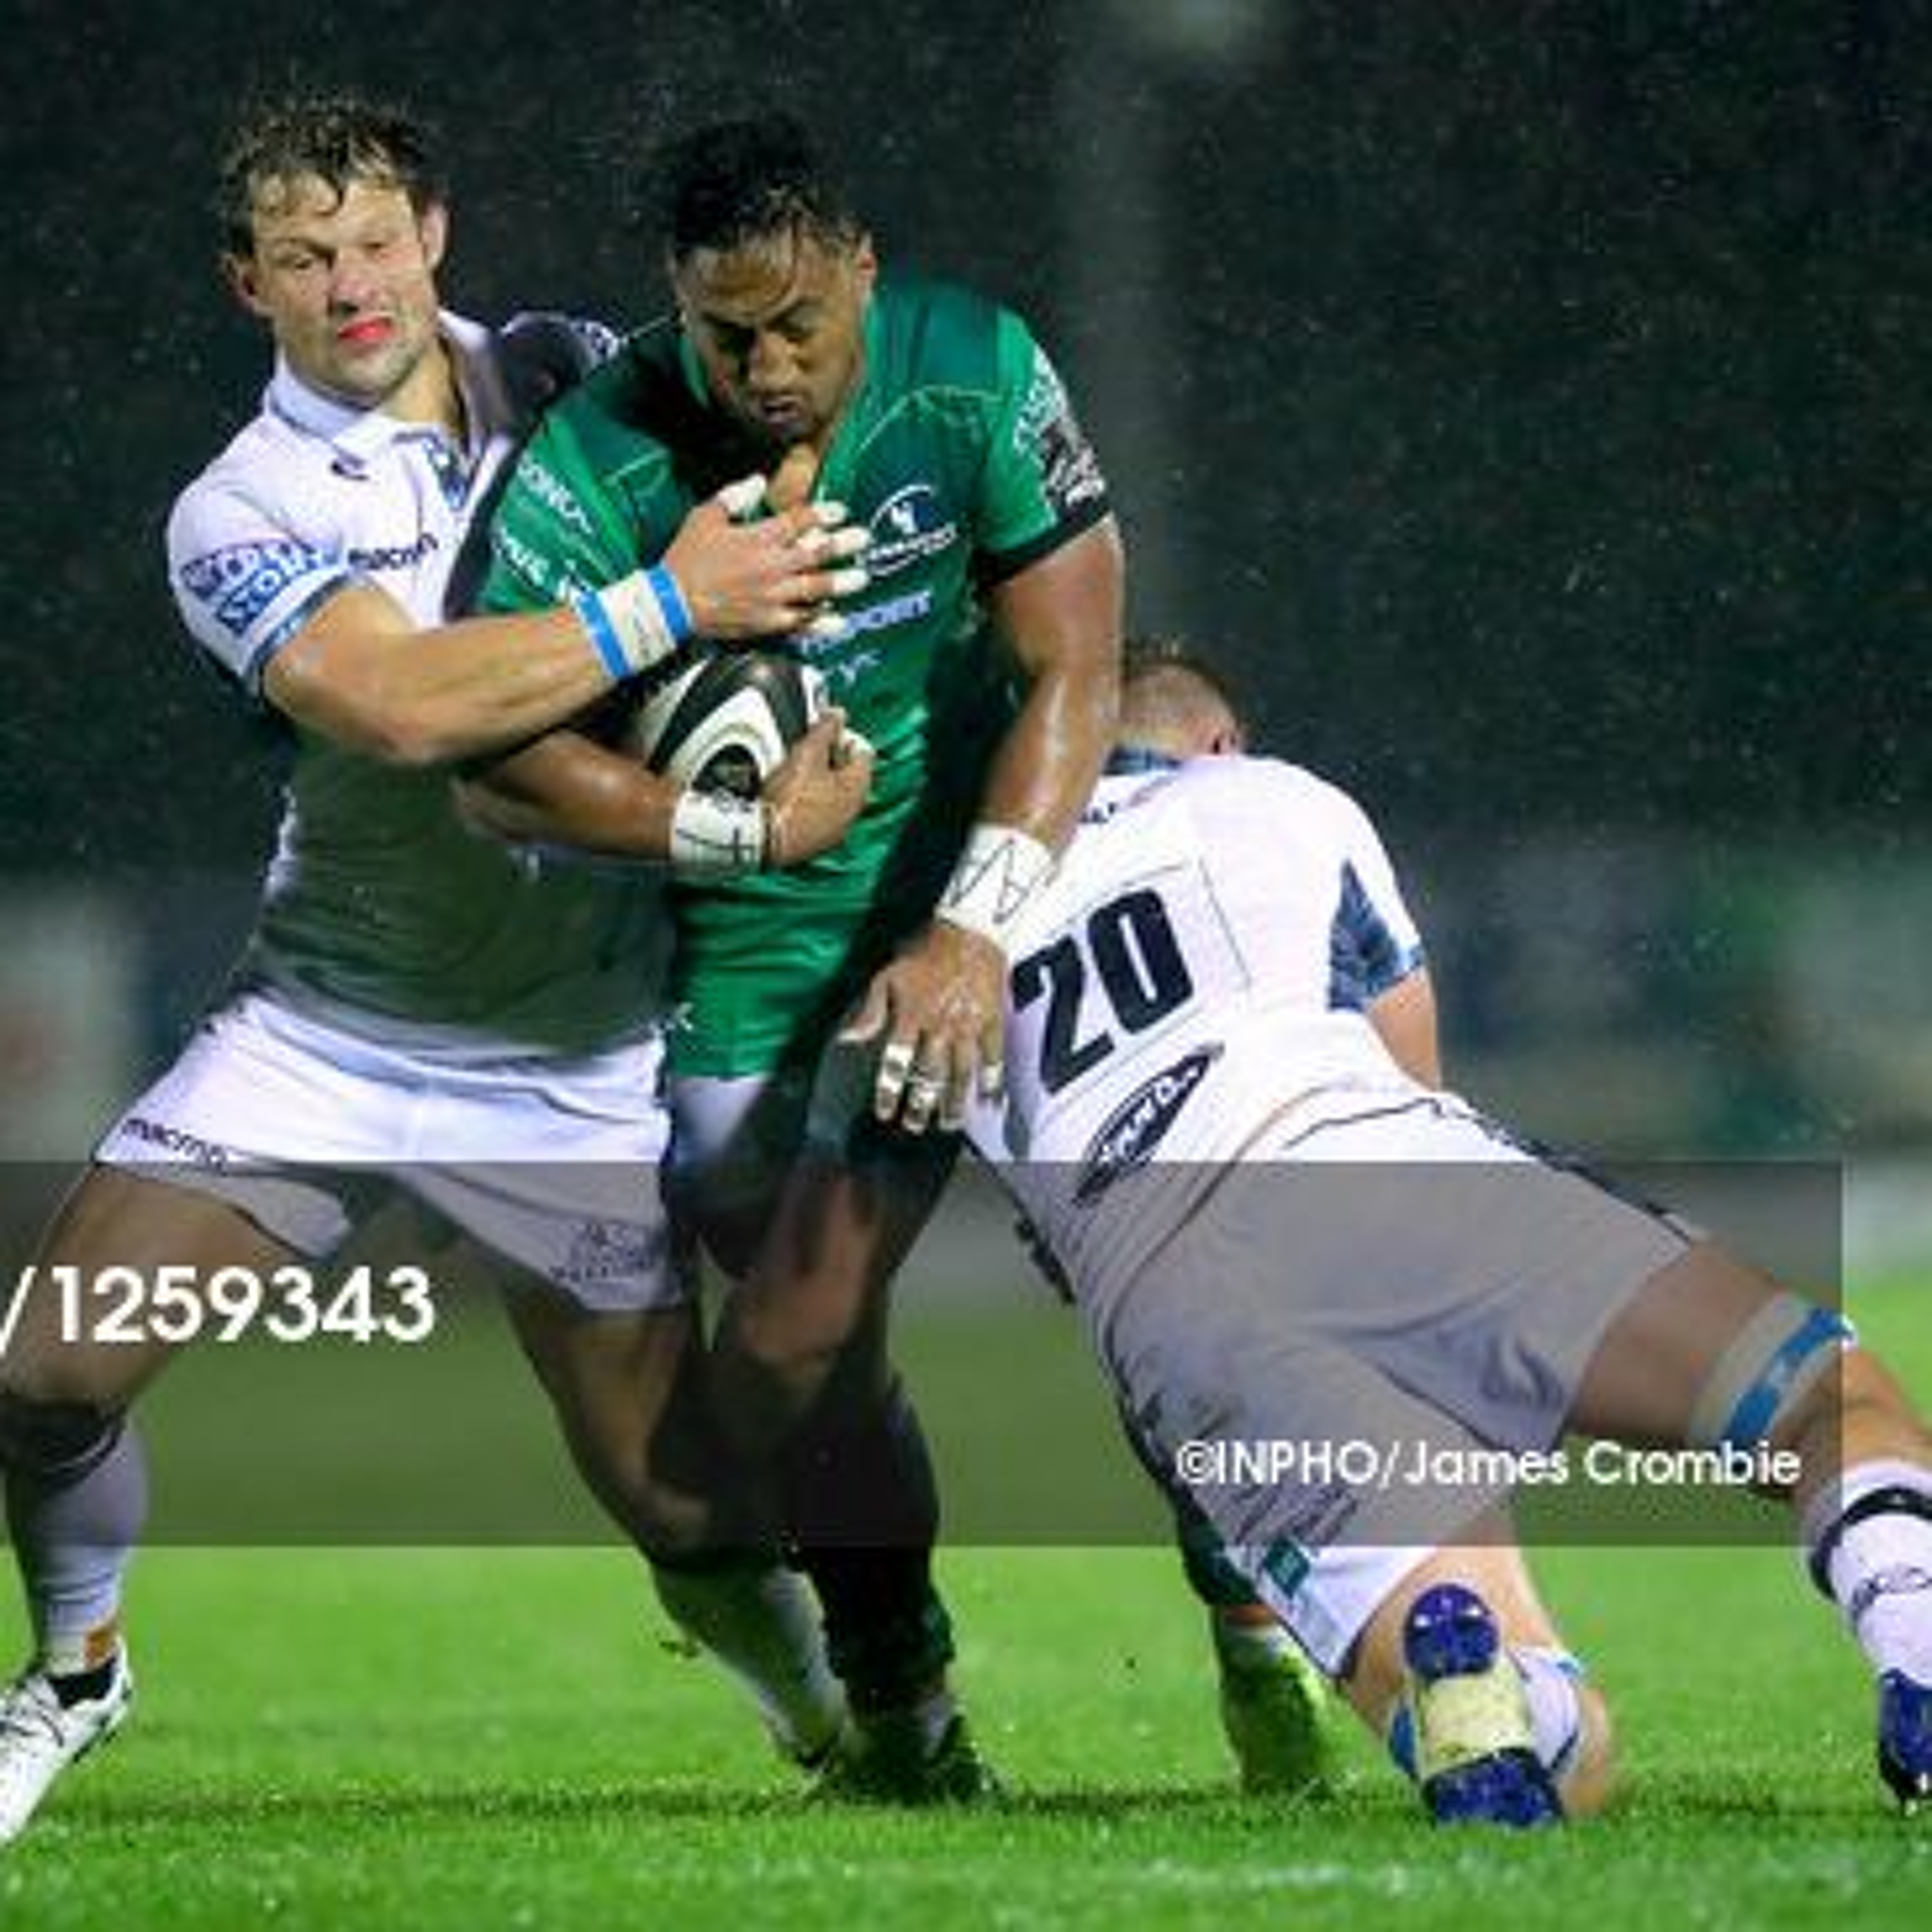 Warriors Wash Connacht Away - Craggy Rugby podcast